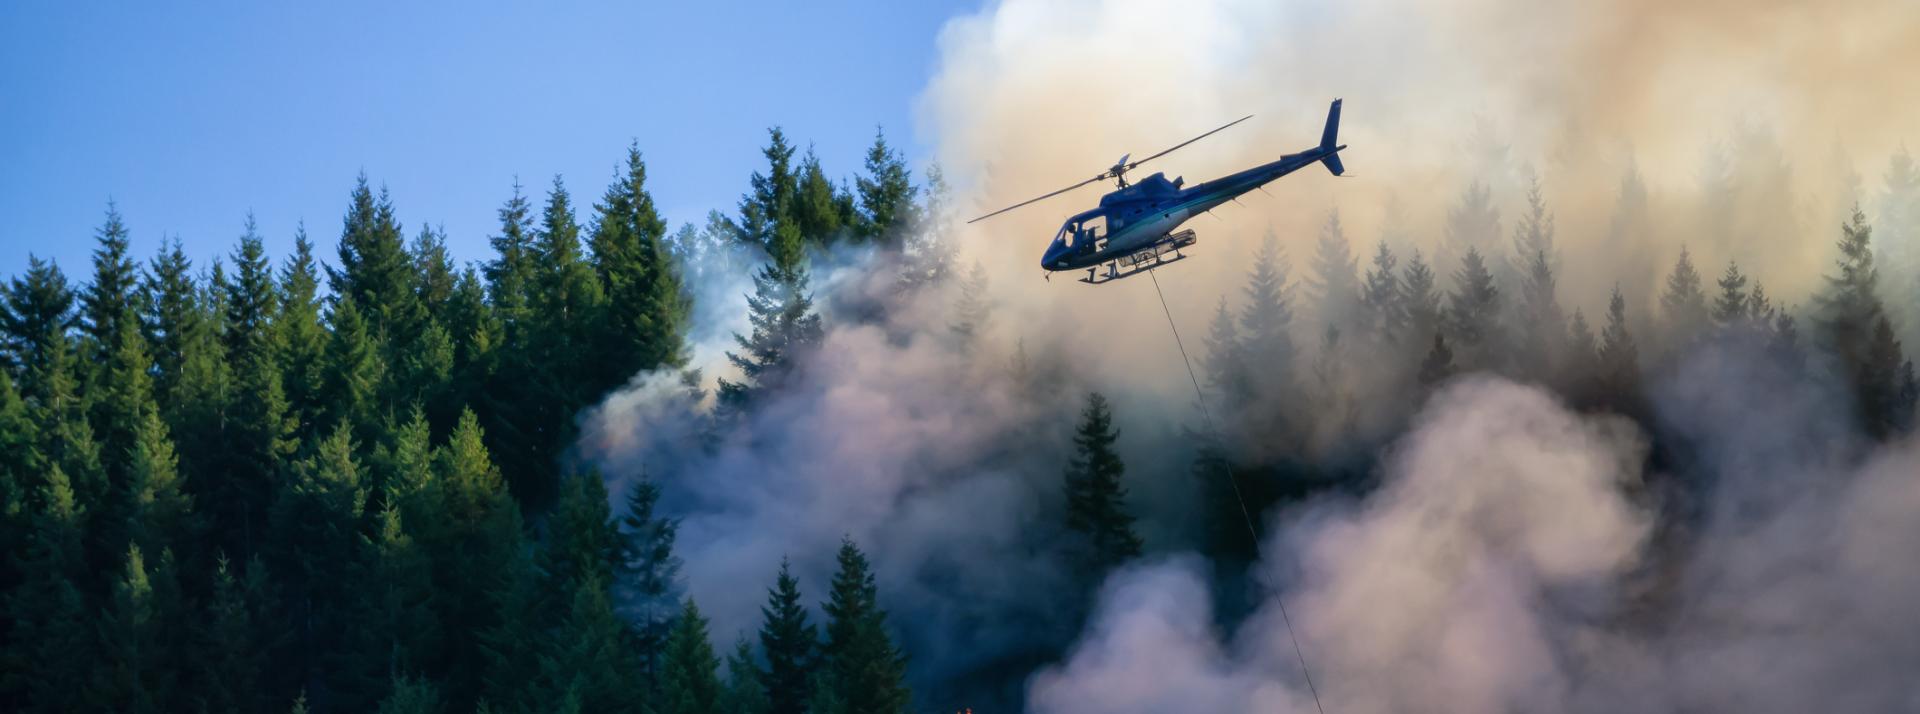 Forest fire, helicopter responding. 